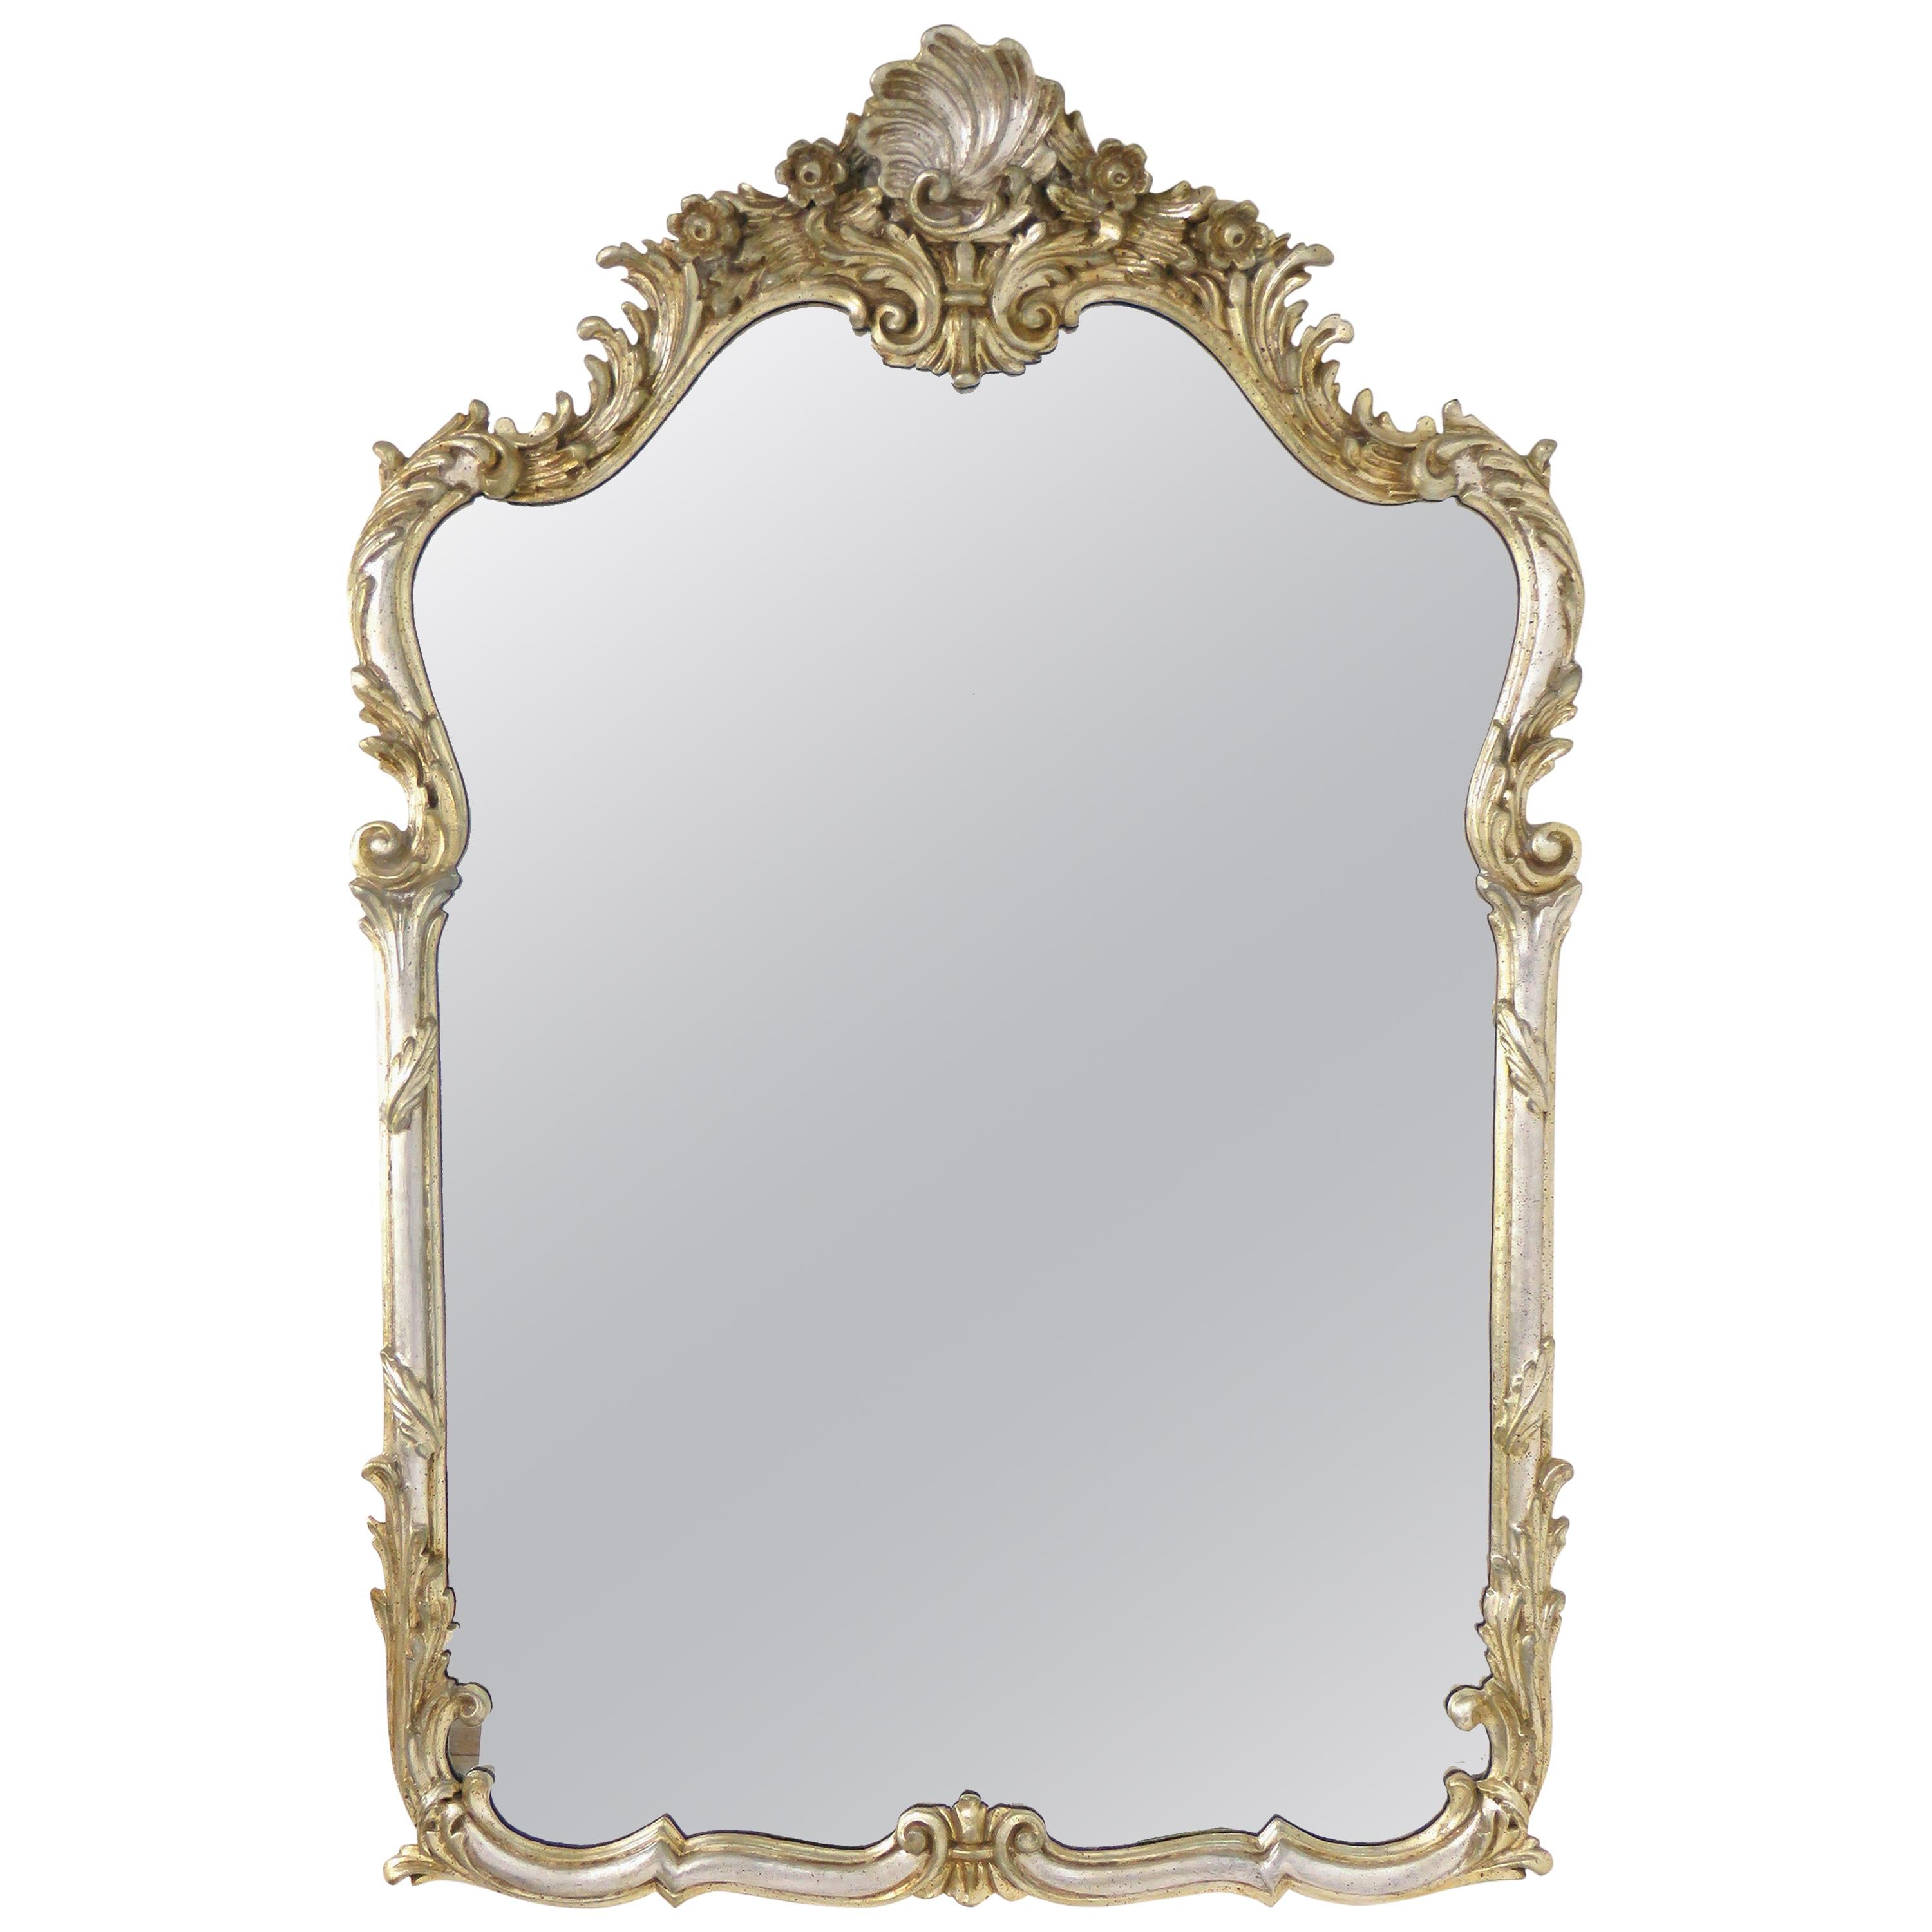 La Barge Silver Giltwood Wall Mirror, Made in Italy, circa 1960s